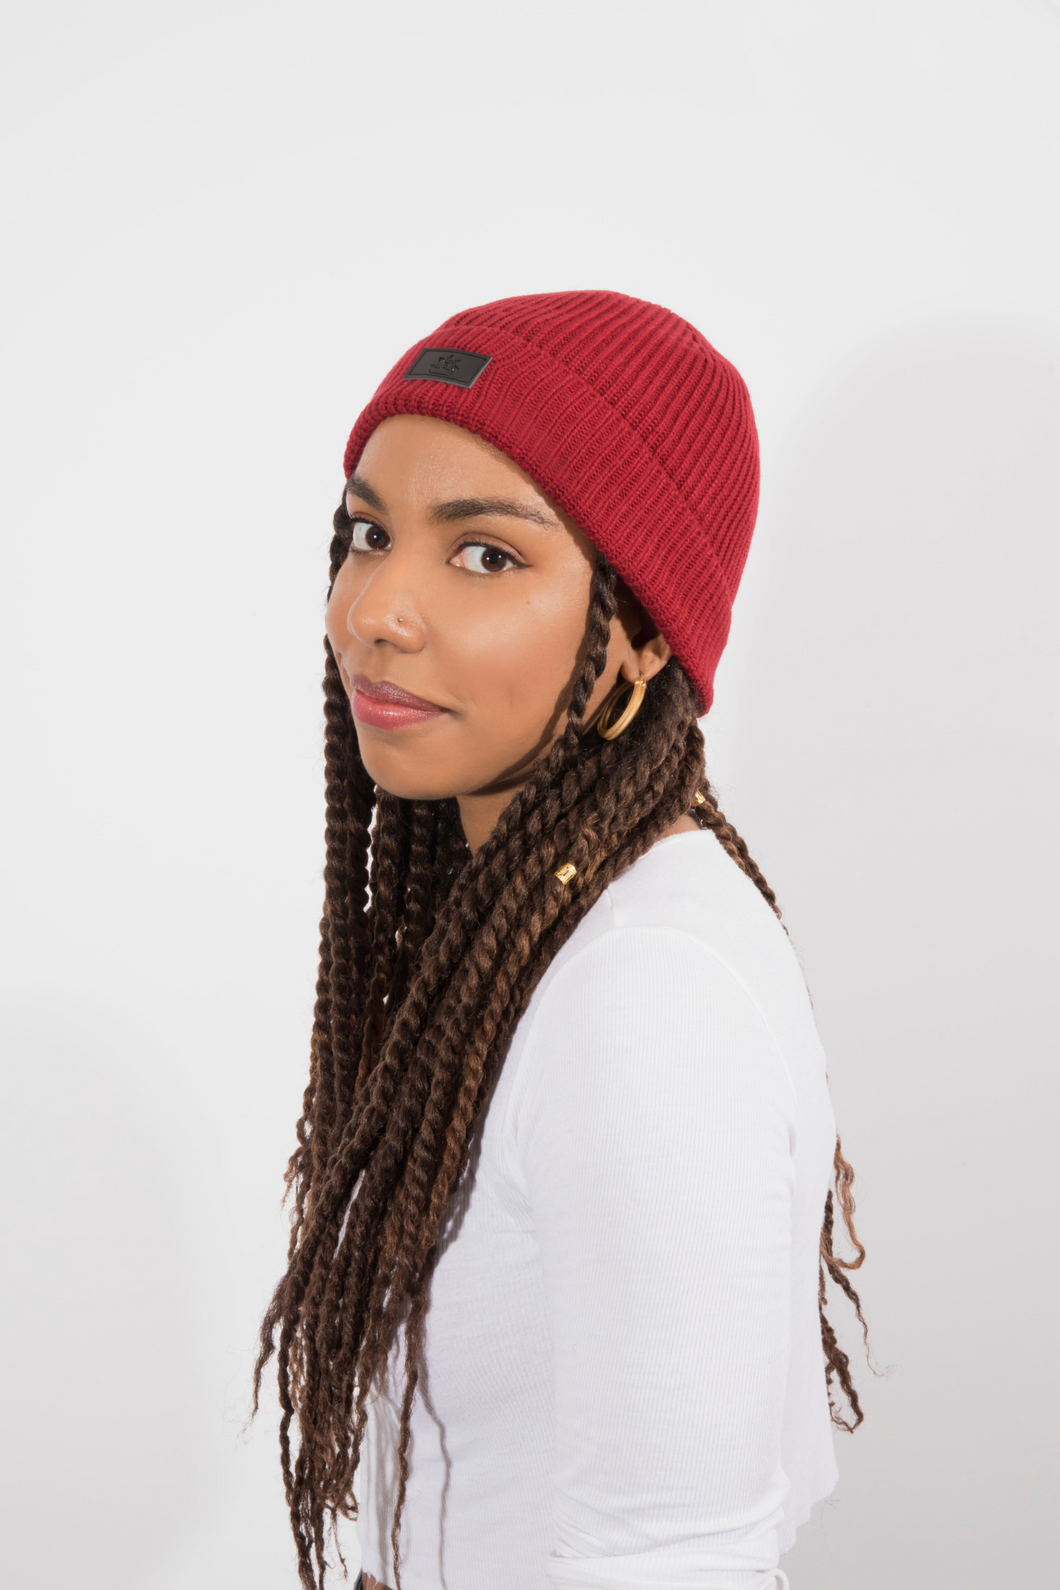 Absolute Red Wine Satin Lined Beanie - Black Sunrise UK Satin Lined Hats,. Satin lined Beanie, Hoodies. For children, adults, babies. For those with curly natural hair, sensitive scalps and fragile curls.